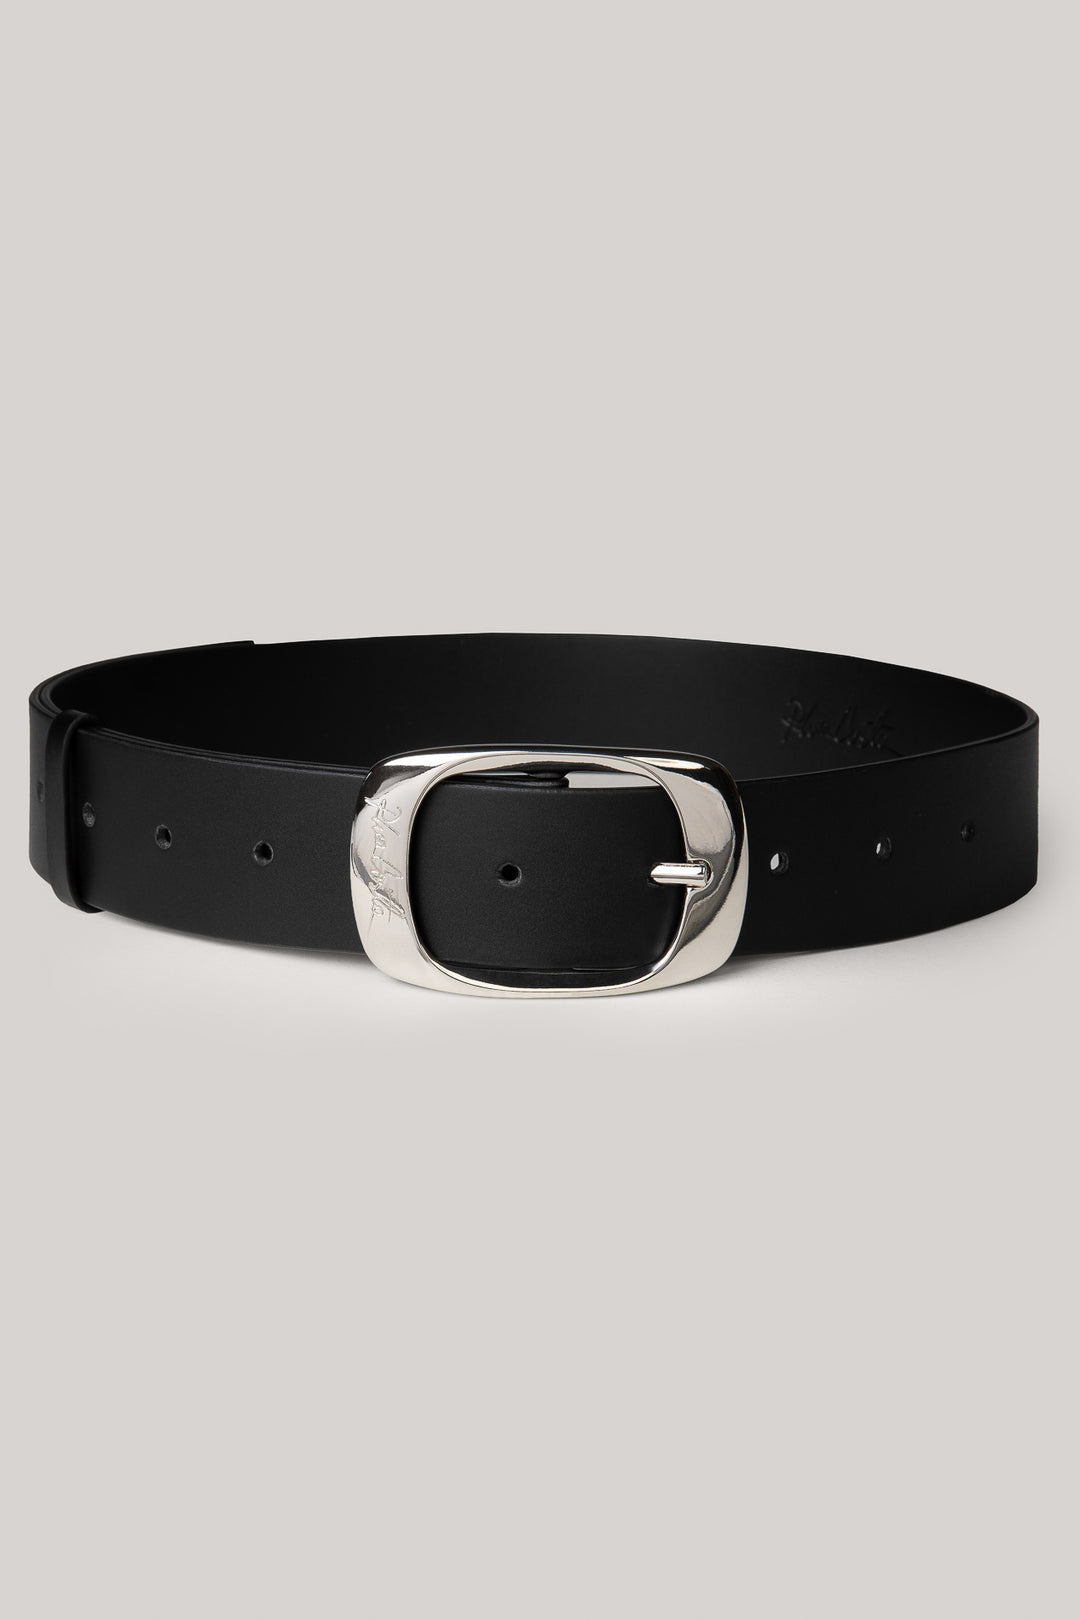 Matte Black Leather Waist Belt With Silver Buckle